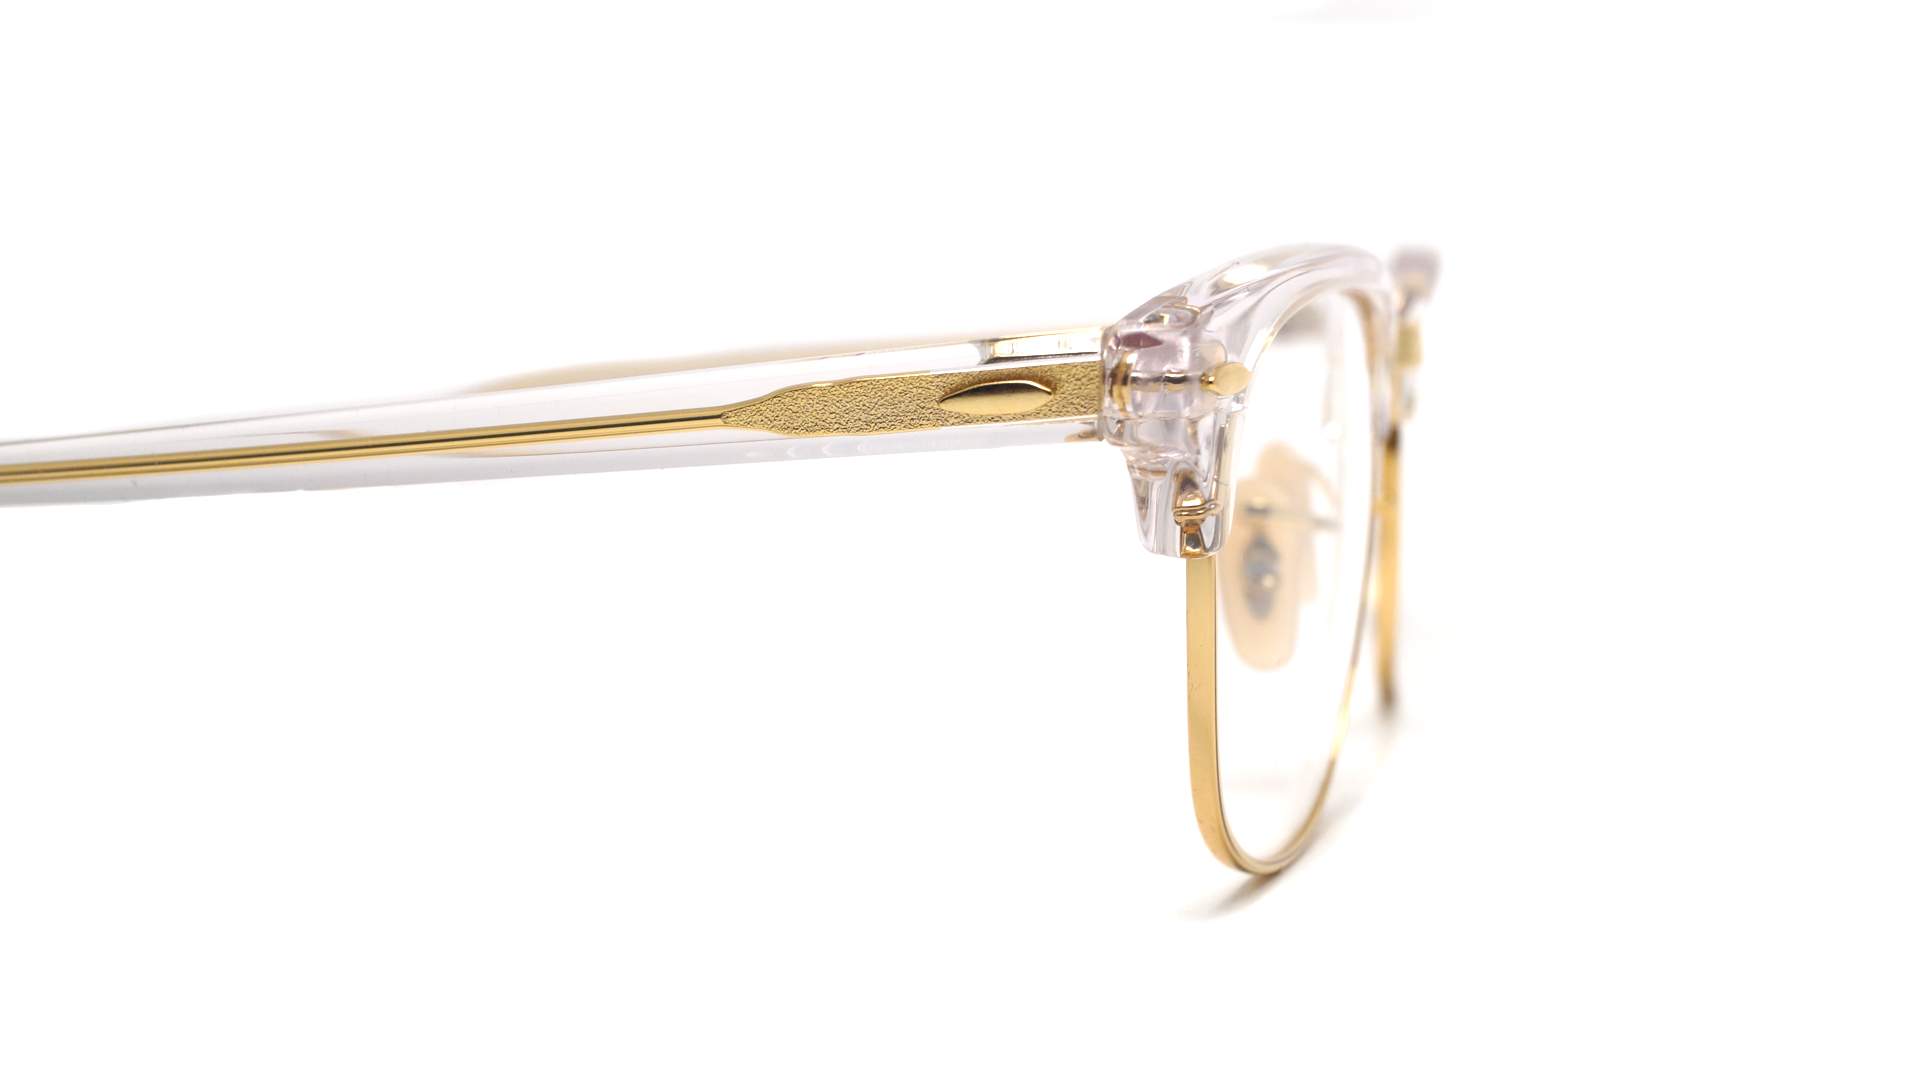 clear gold ray bans